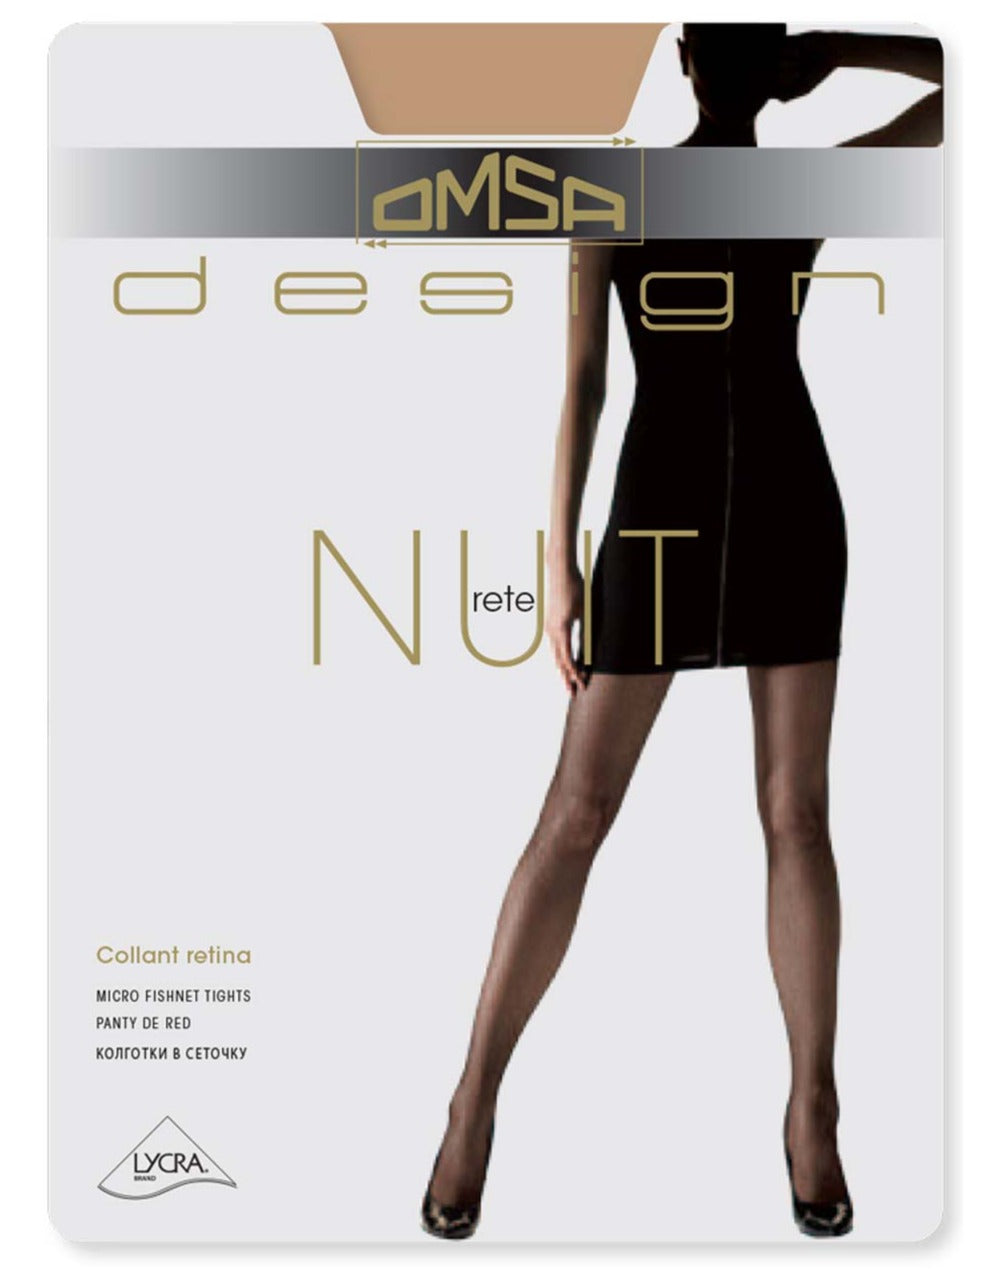 Omsa Nuit Collant Pack - Classic micro fishnet mesh tights in black, nude, cream, navy, lilac and brown